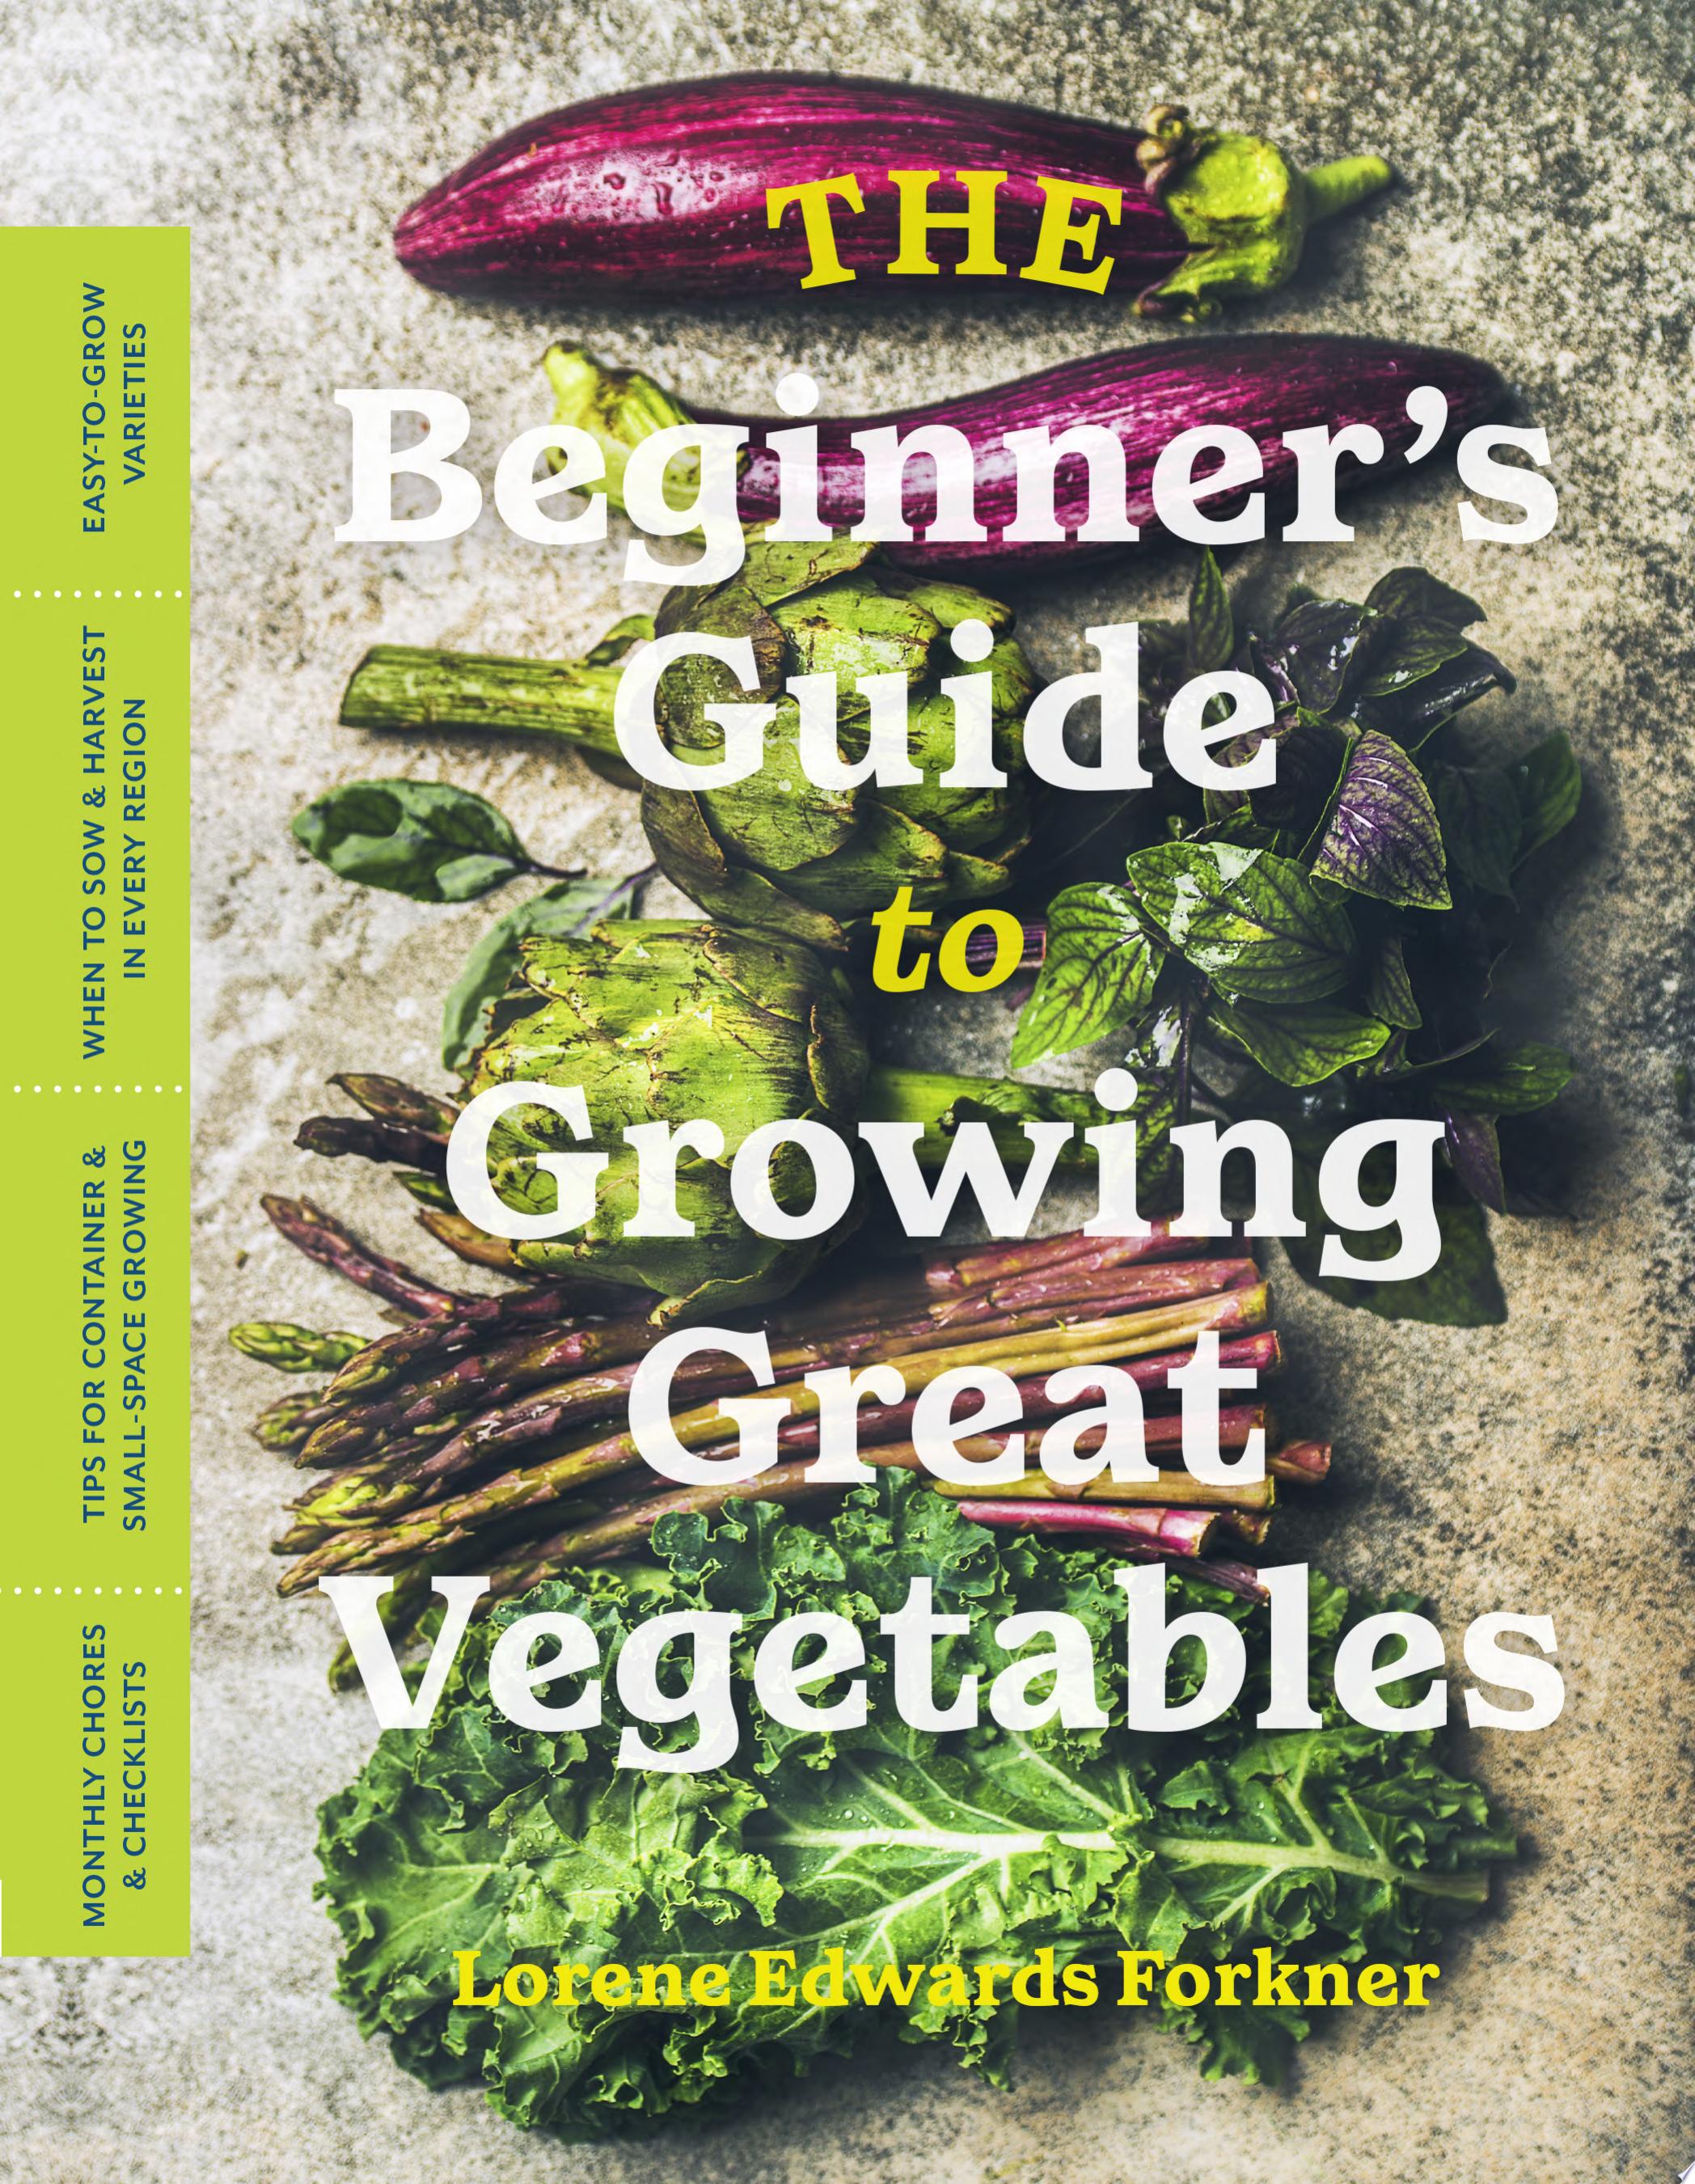 Image for "The Beginners Guide to Growing Great Vegetables"